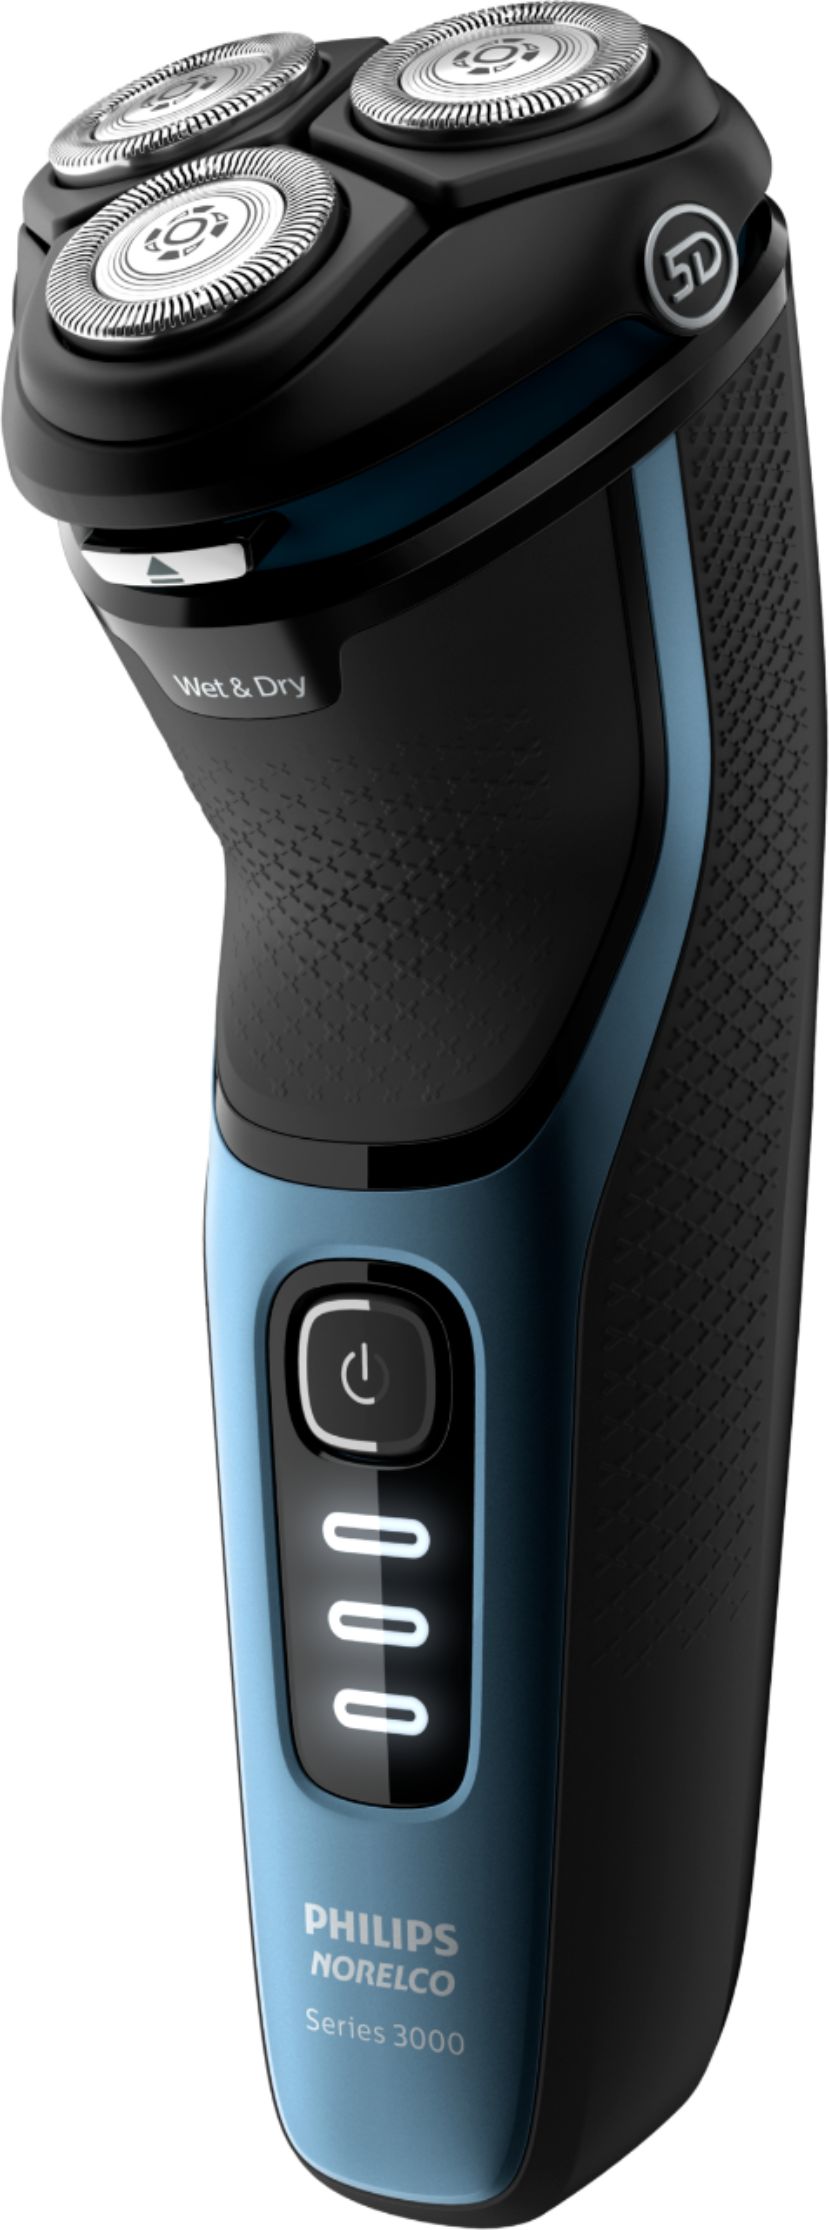 Philips Norelco - 3500 series Wet/Dry Electric Shaver - Storm Gray_0